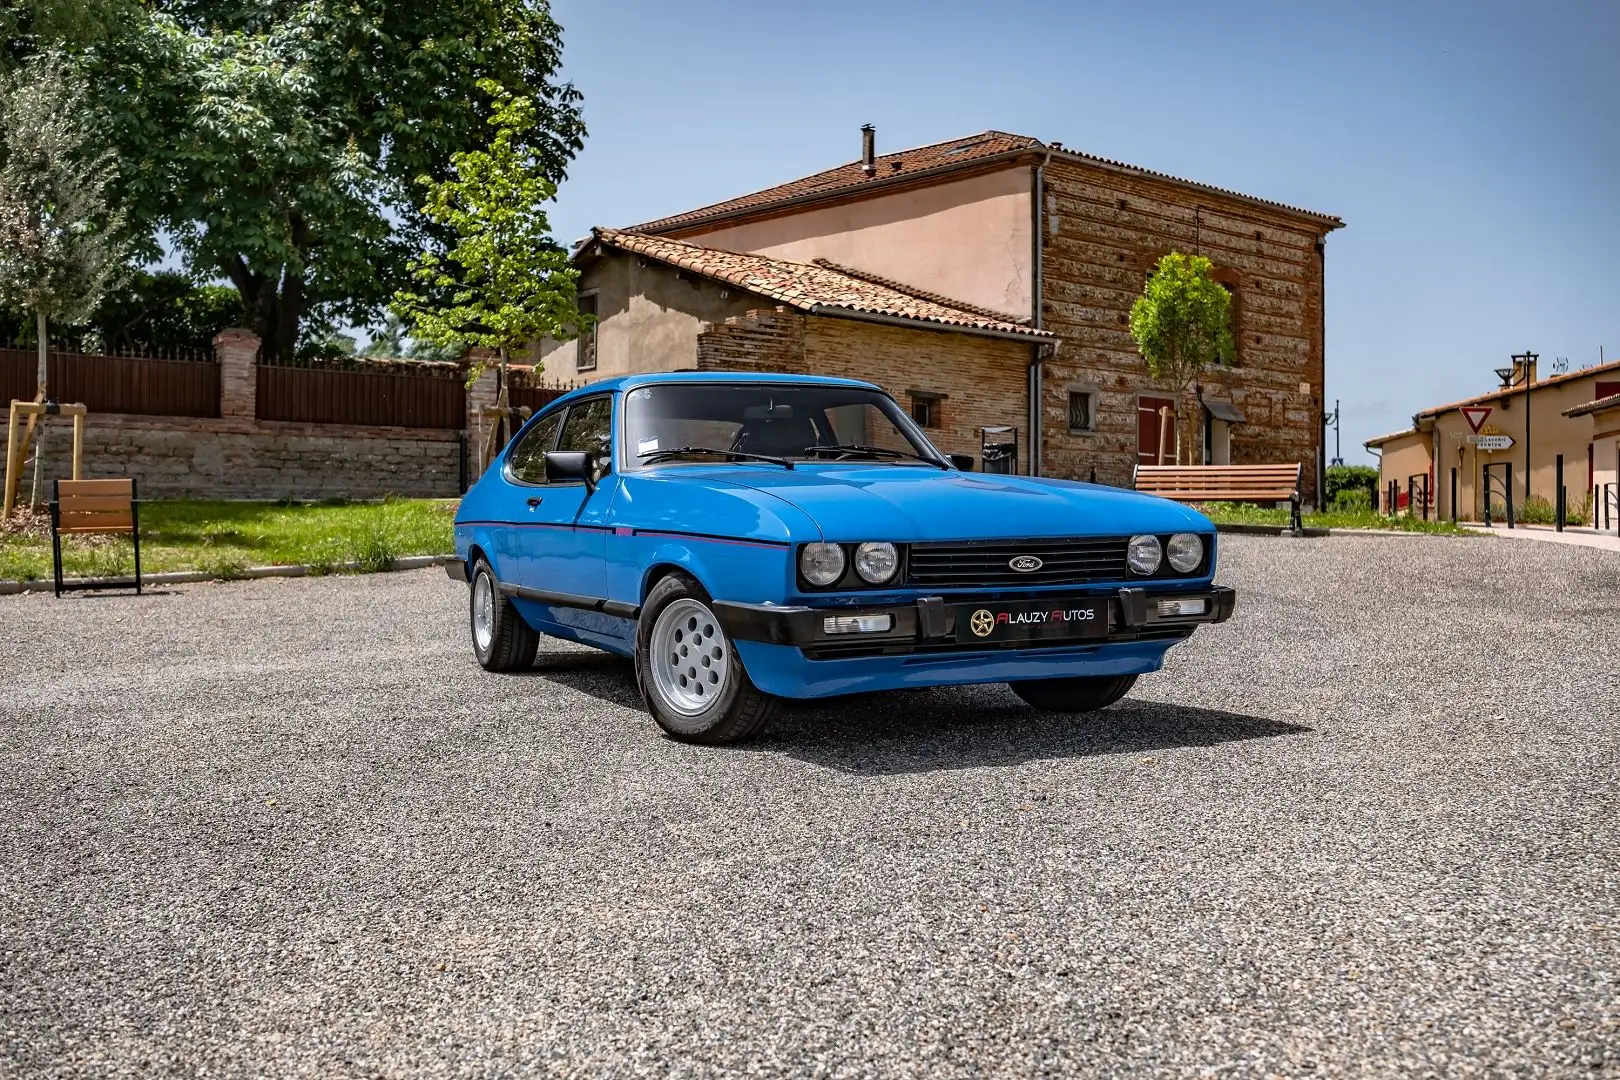 Ford Capri 2.8 INJECTION - 1